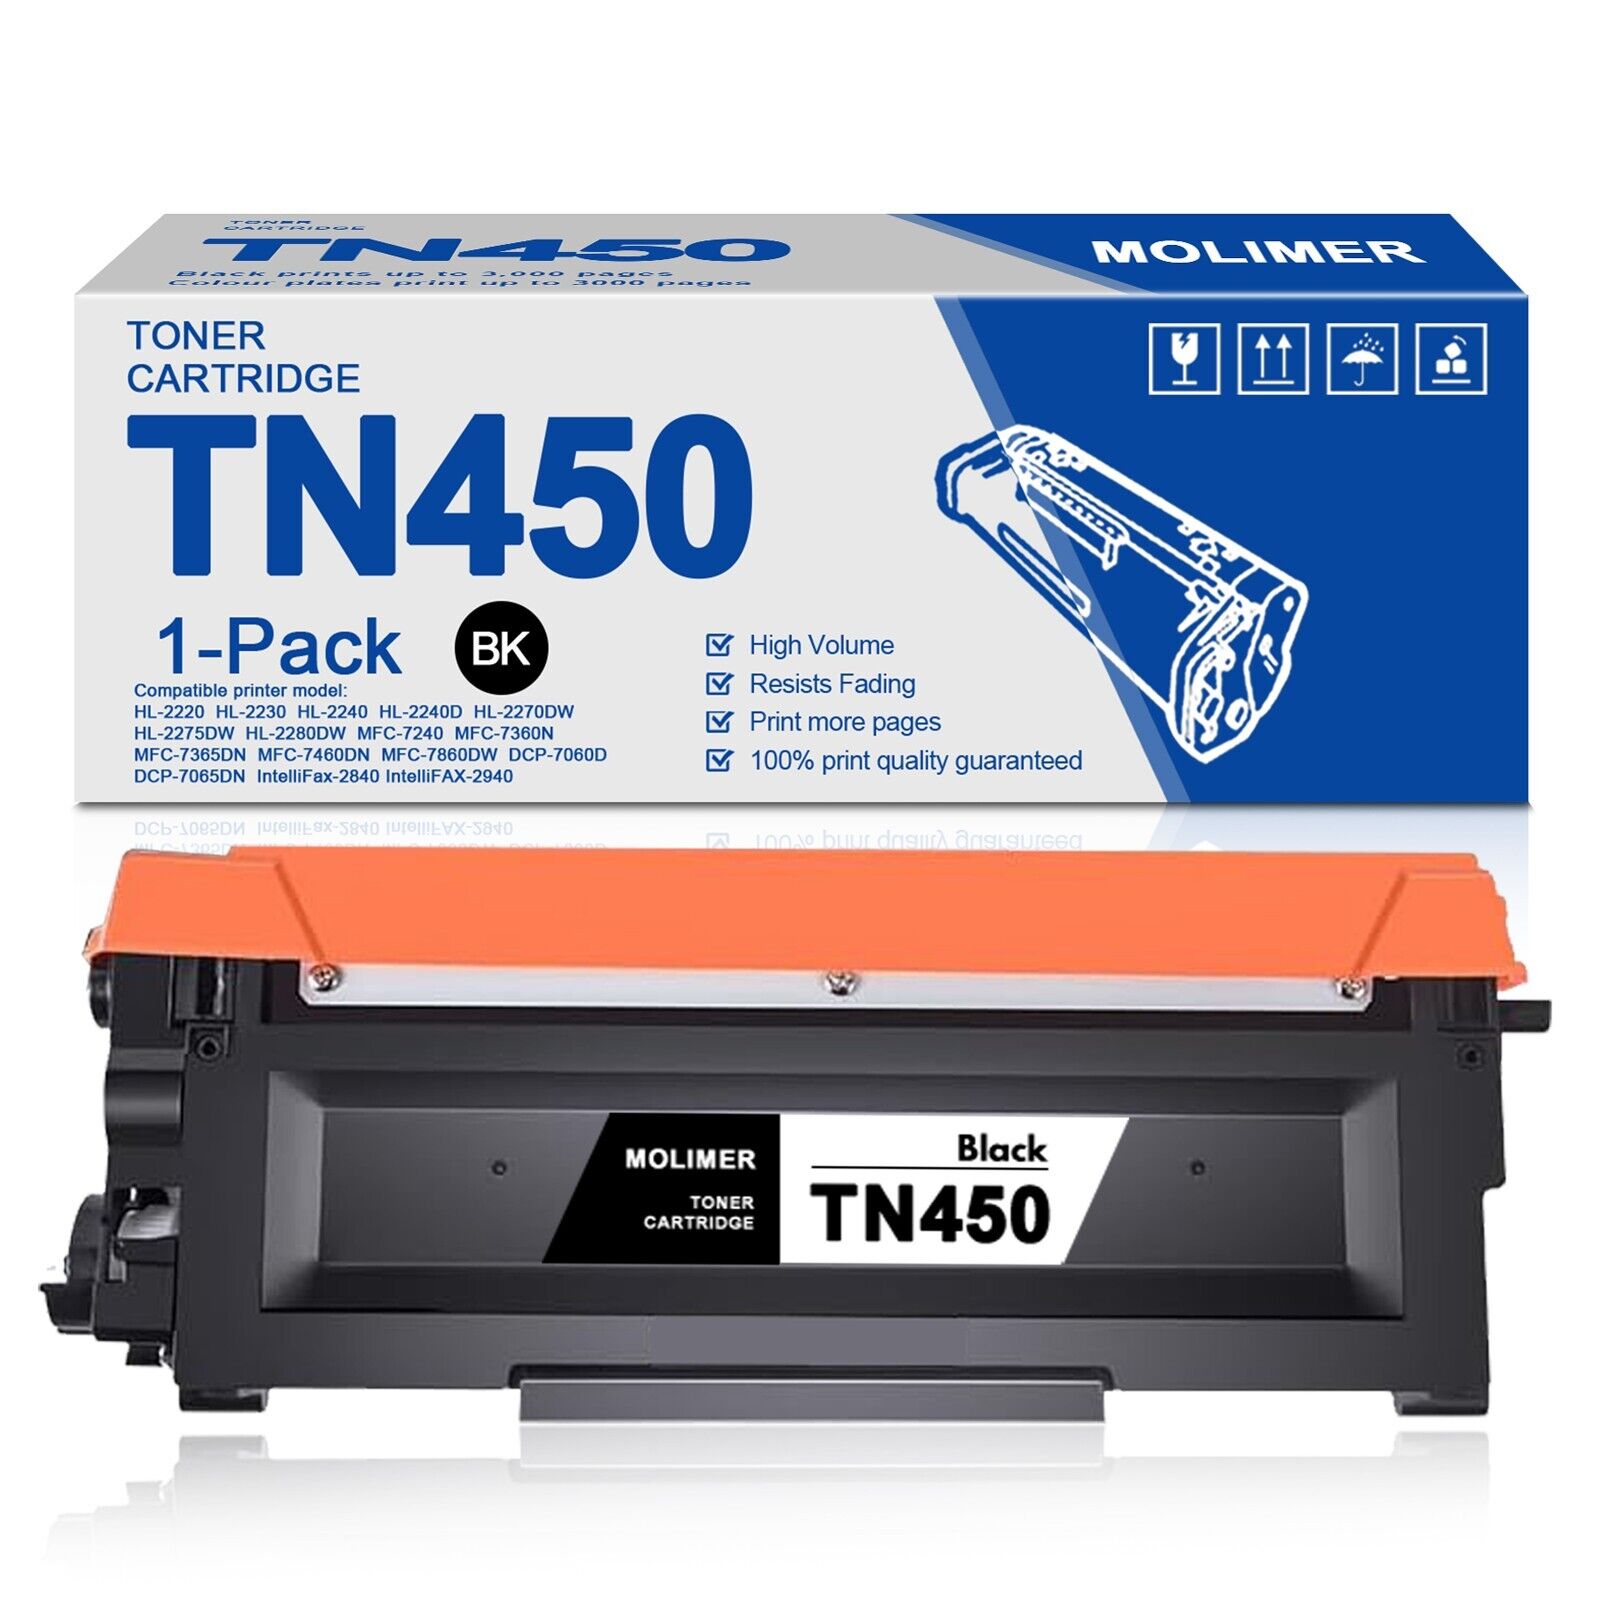 TN450 High Yield Toner Cartridge Replacement for Brother MFC-7860DW Printer 1BK